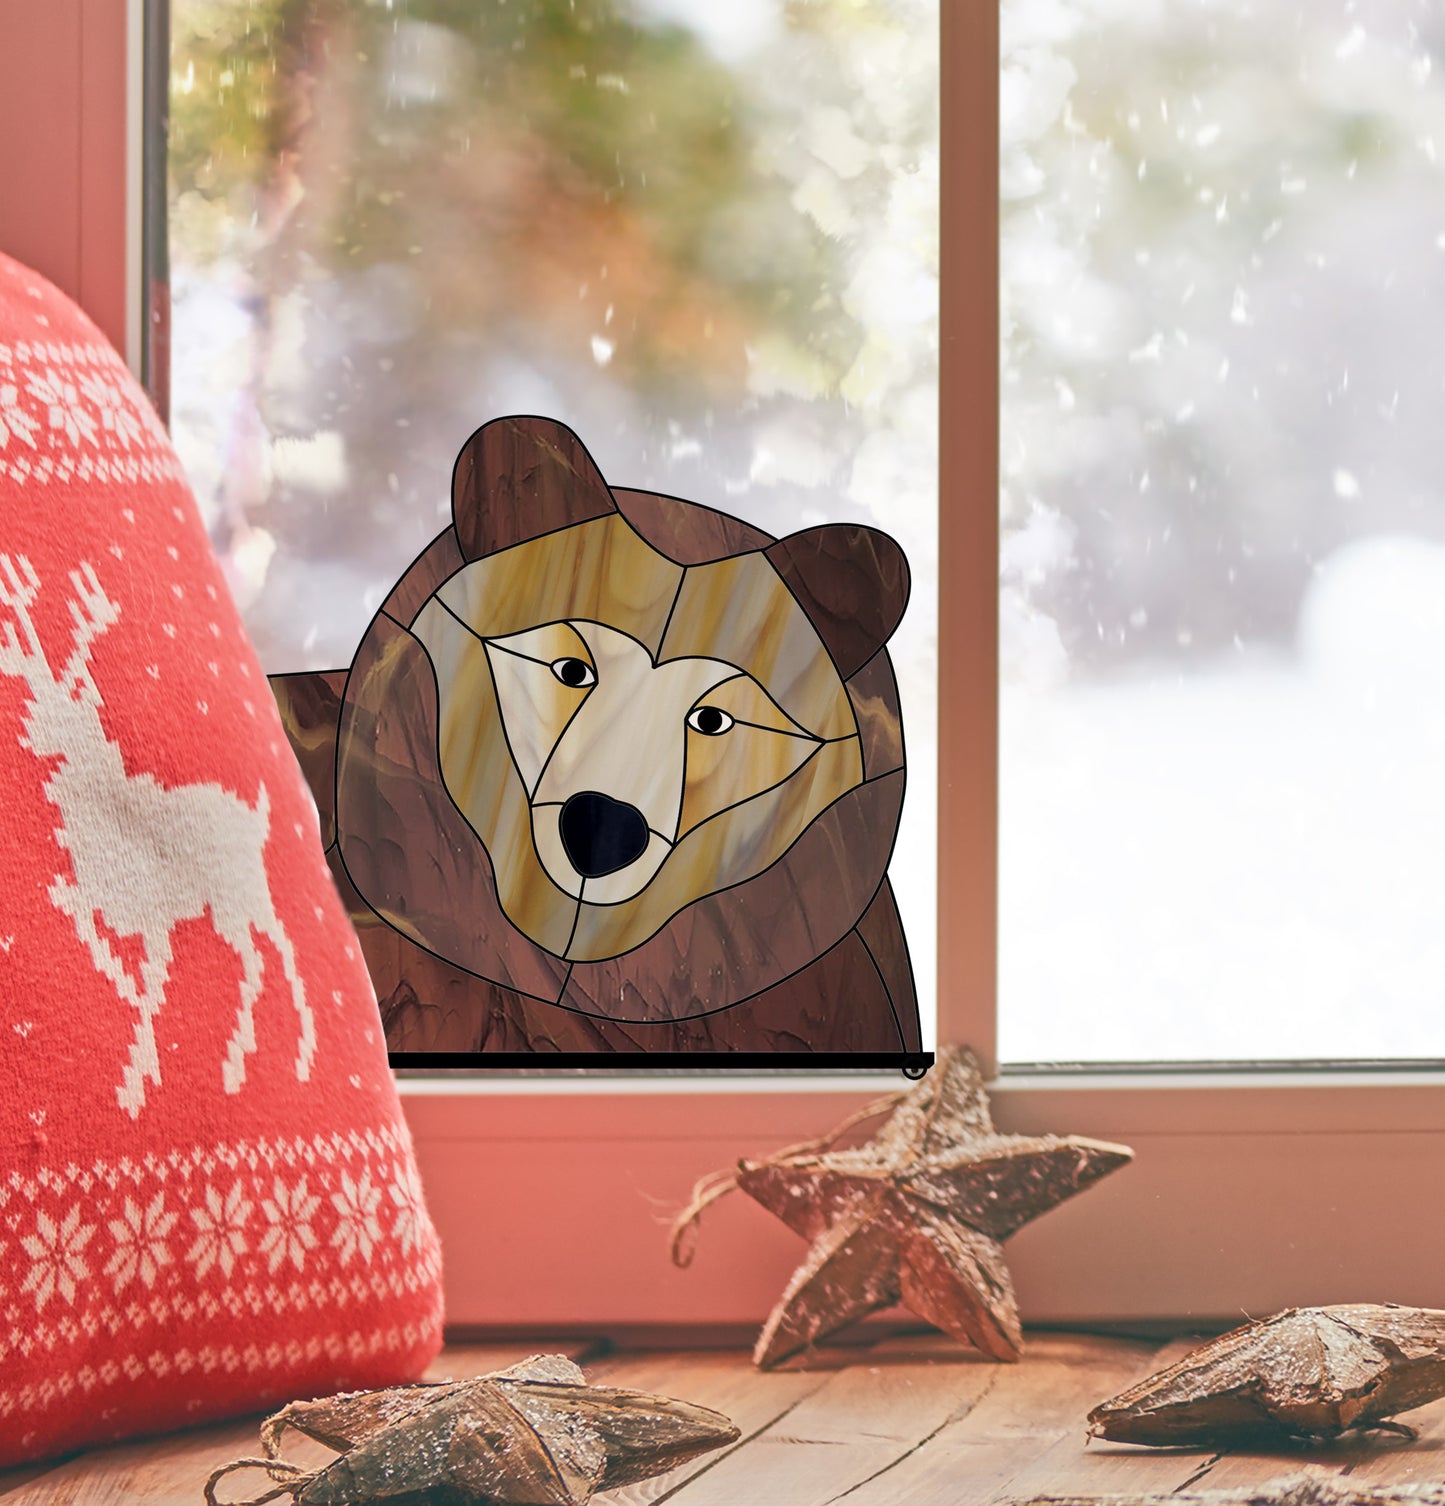 Stained glass pattern for a bear peeking in the window, instant PDF download, shown in a window with Christmas decorations